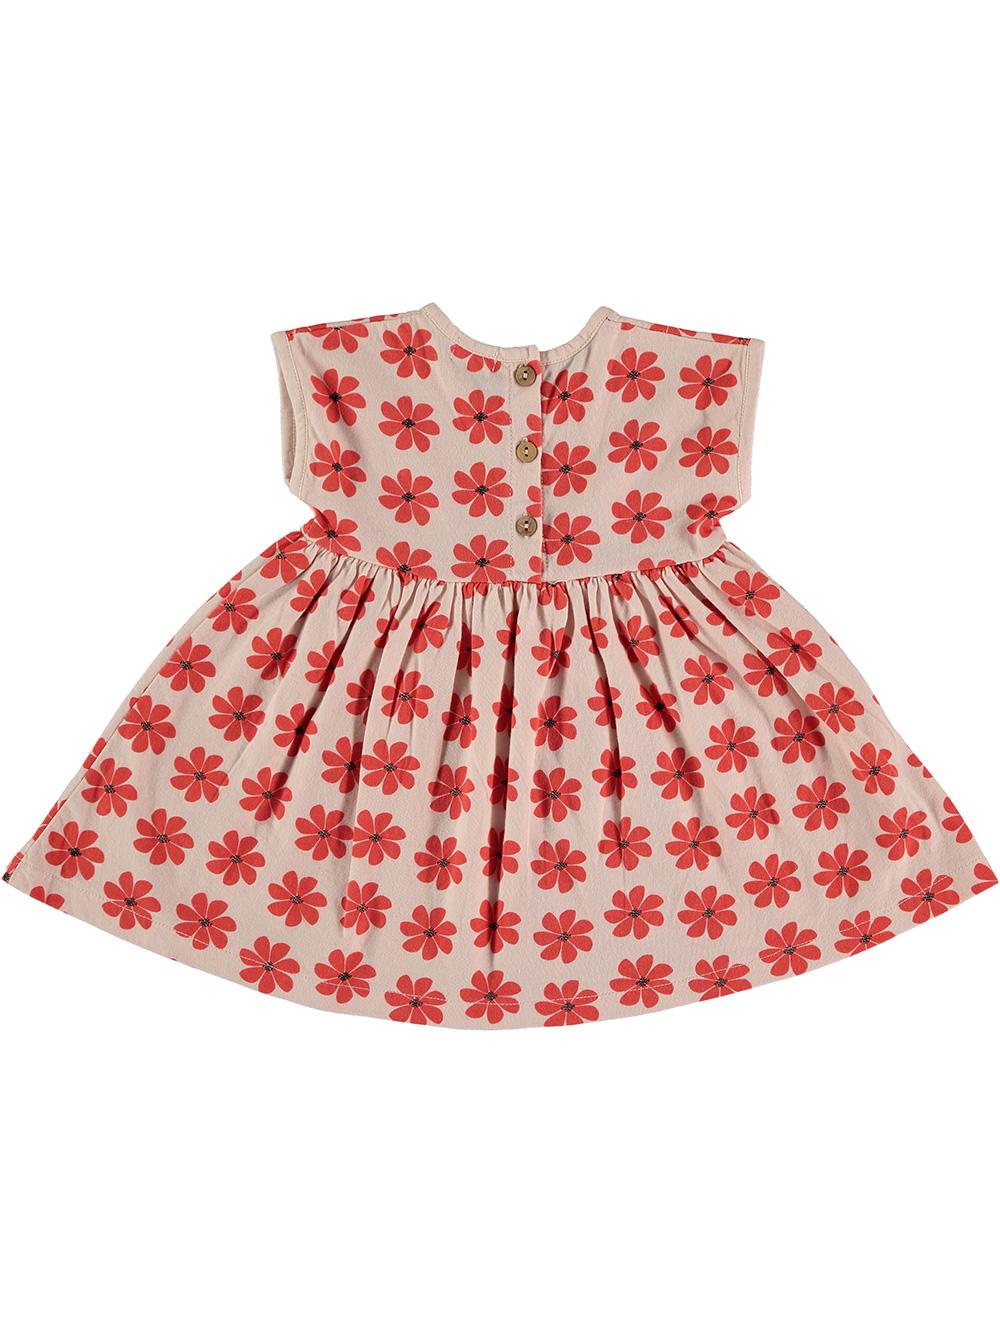 PASTEL PINK BABY DRESS WITH RED FLOWER PRINT